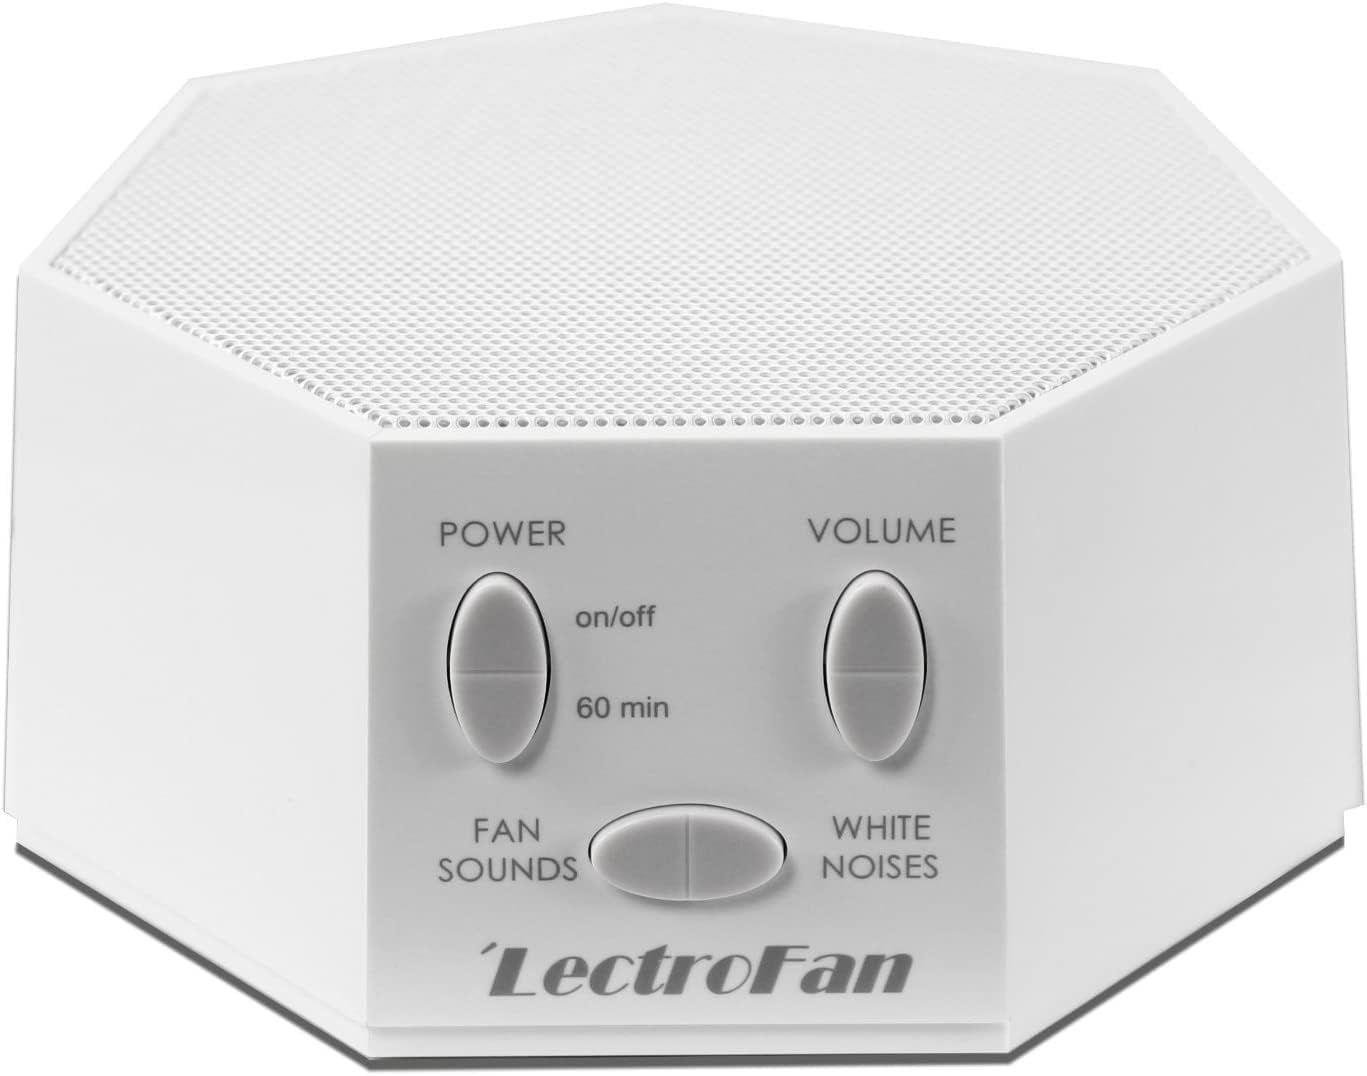 Review of LectroFan High Fidelity White Noise Machine